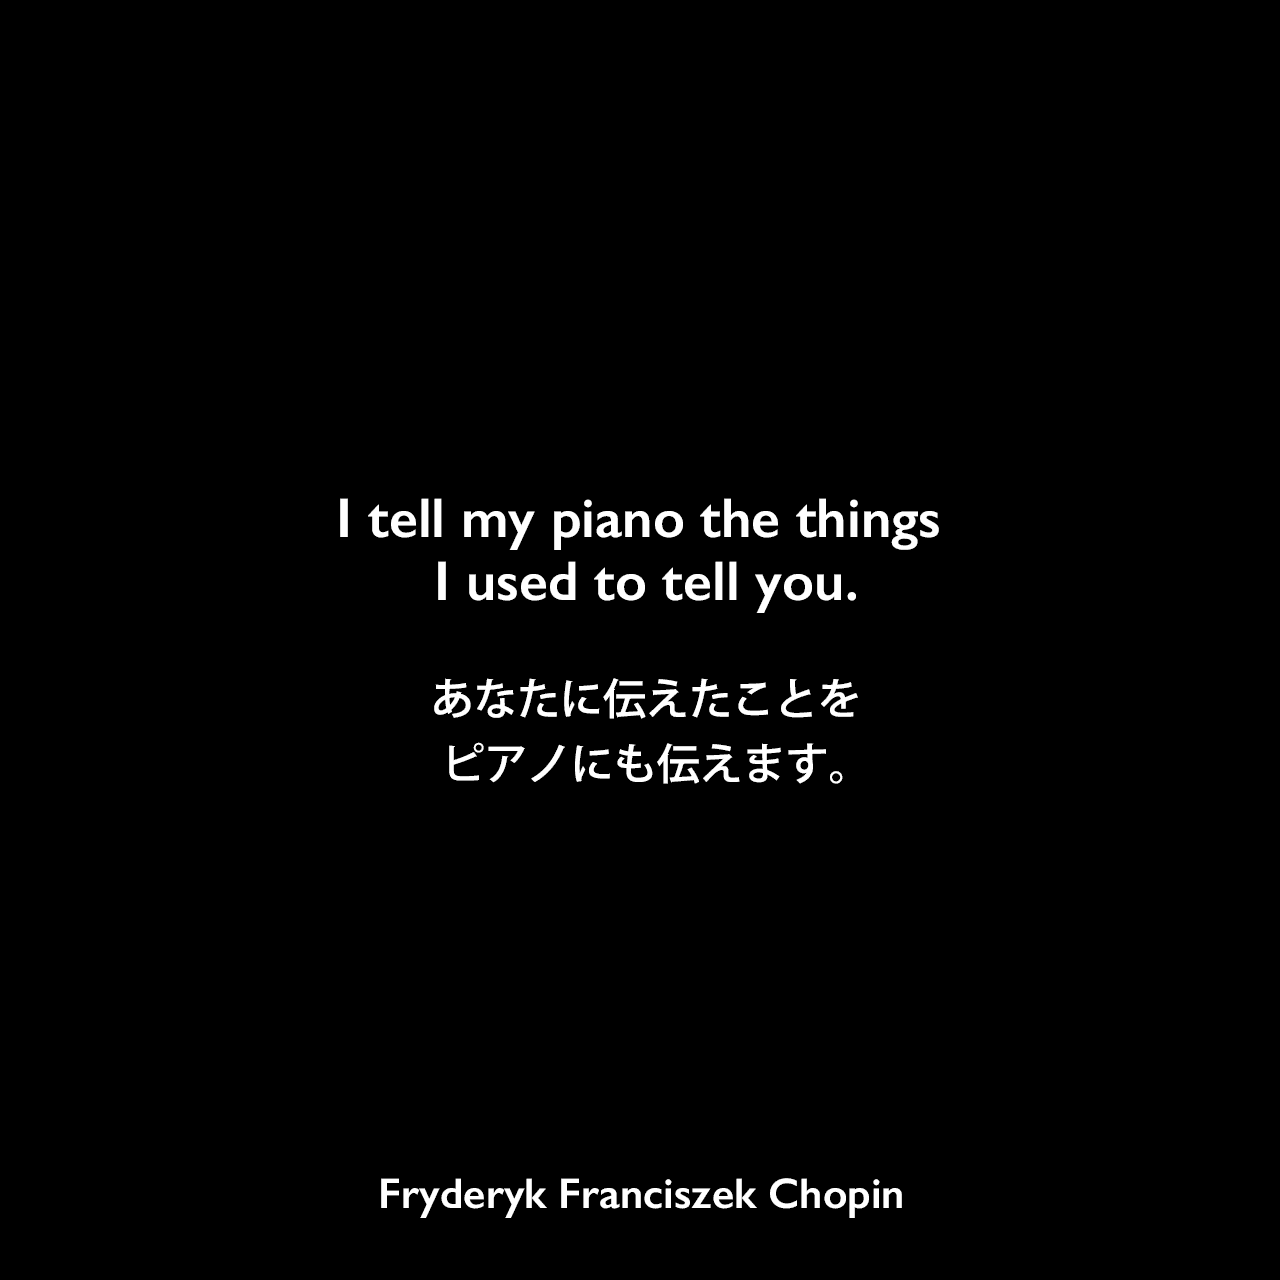 I tell my piano the things I used to tell you.あなたに伝えたことをピアノにも伝えます。Fryderyk Franciszek Chopin